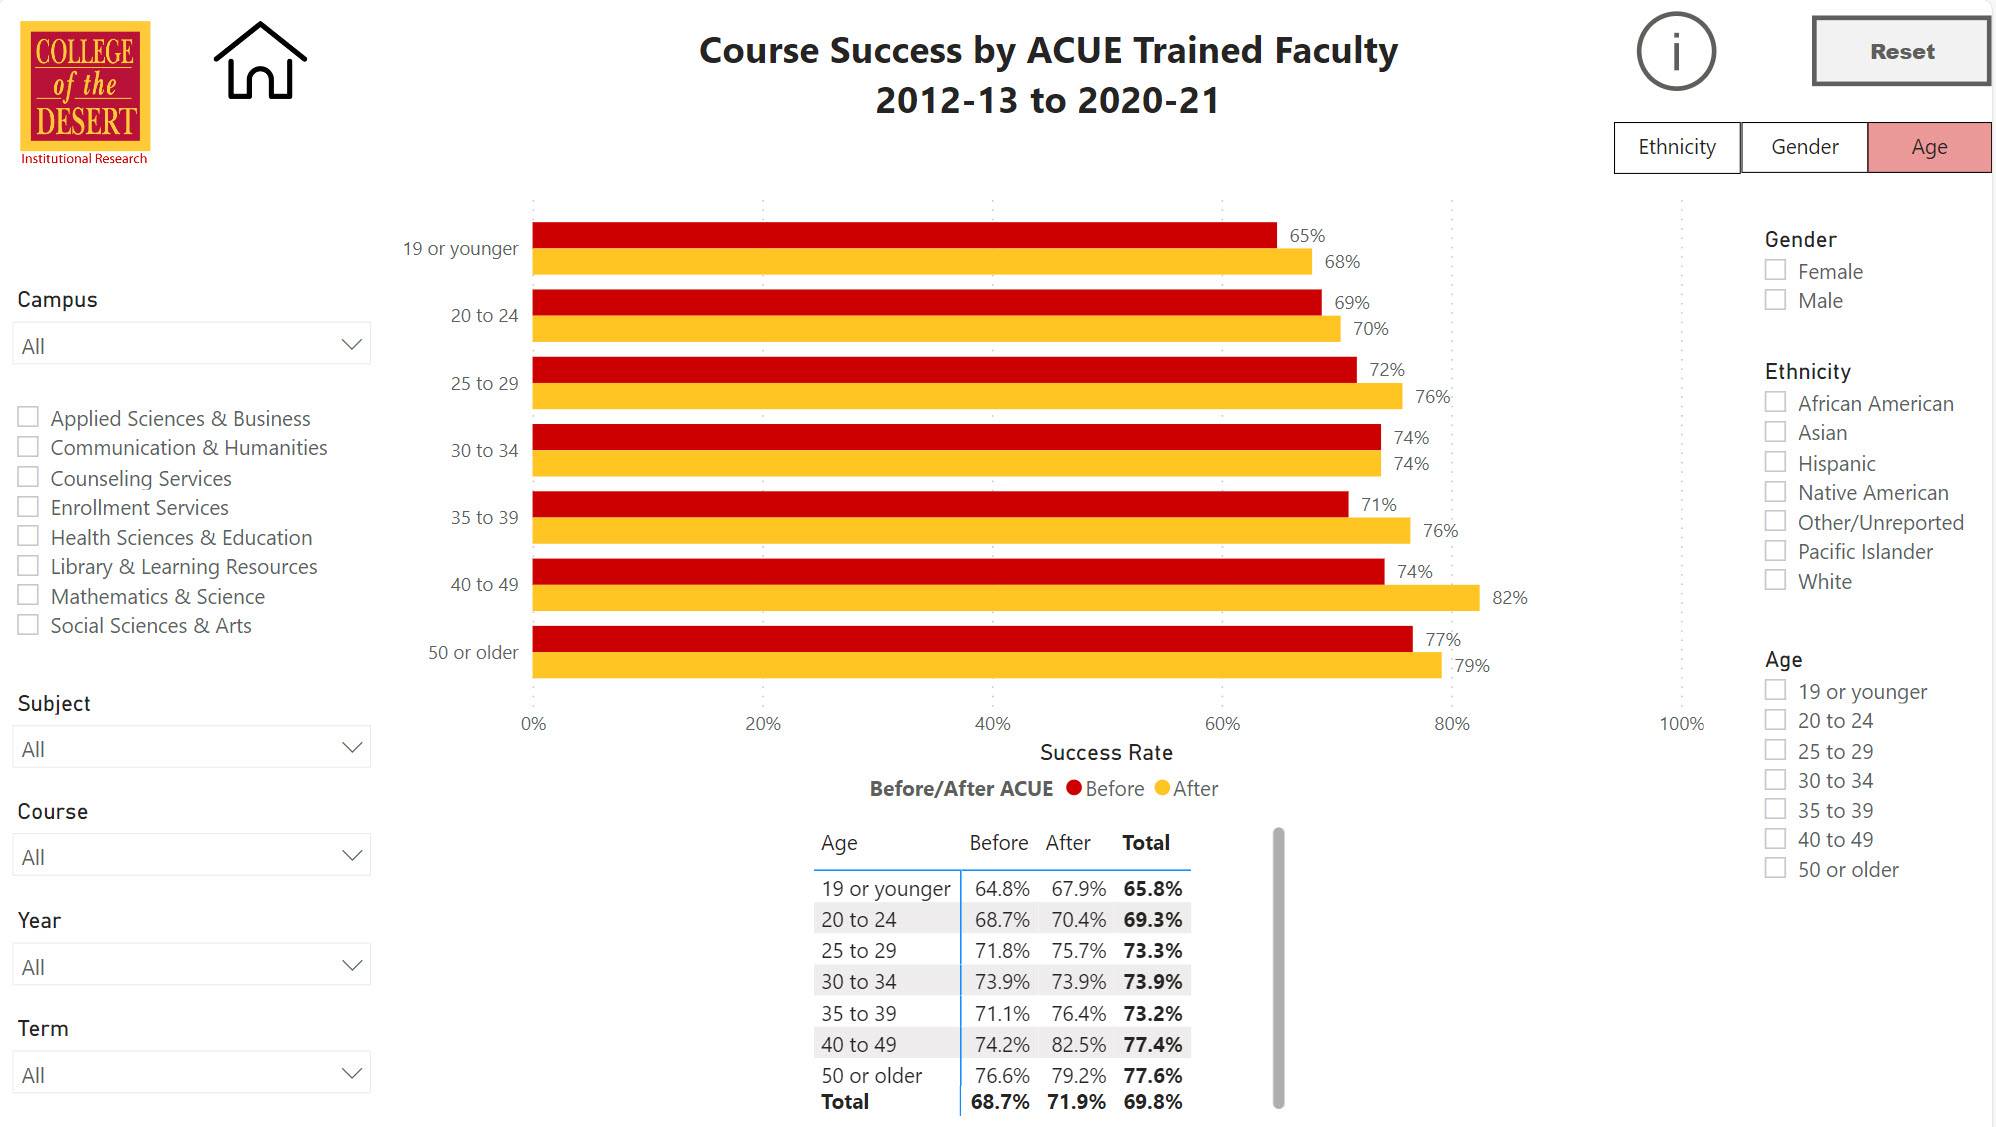 Course Success by ACUE Trained Faculty